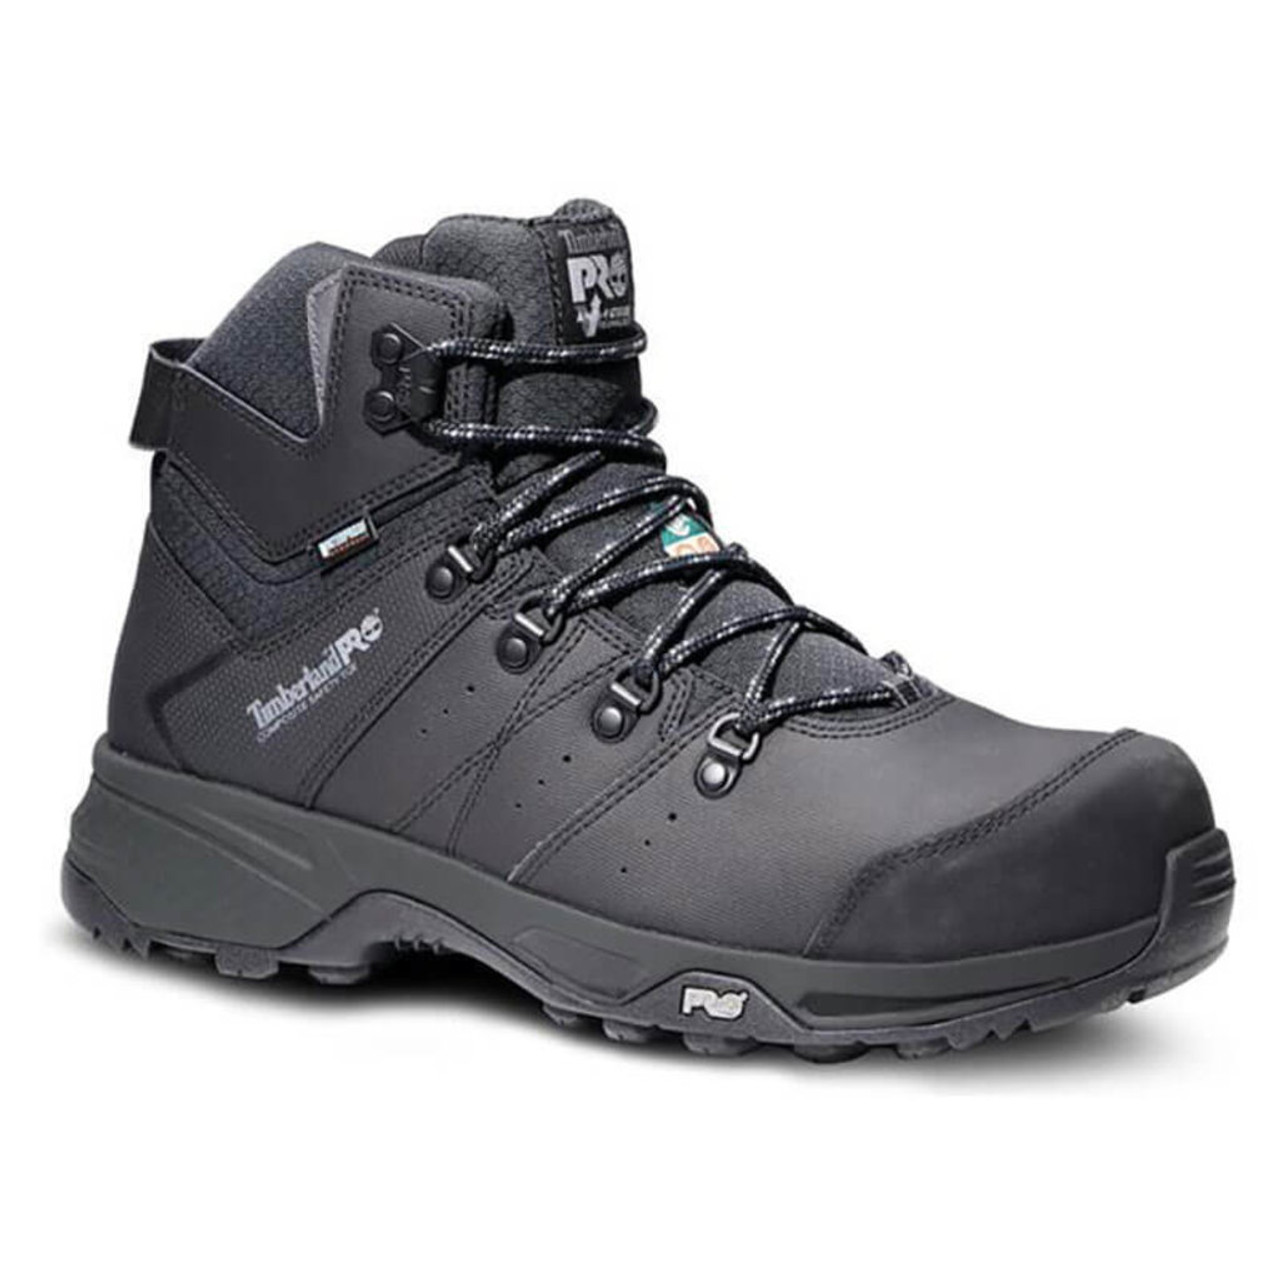 Timberland pro Switchback safety toe boot A2CB8 - Jimmy's Work N Wear